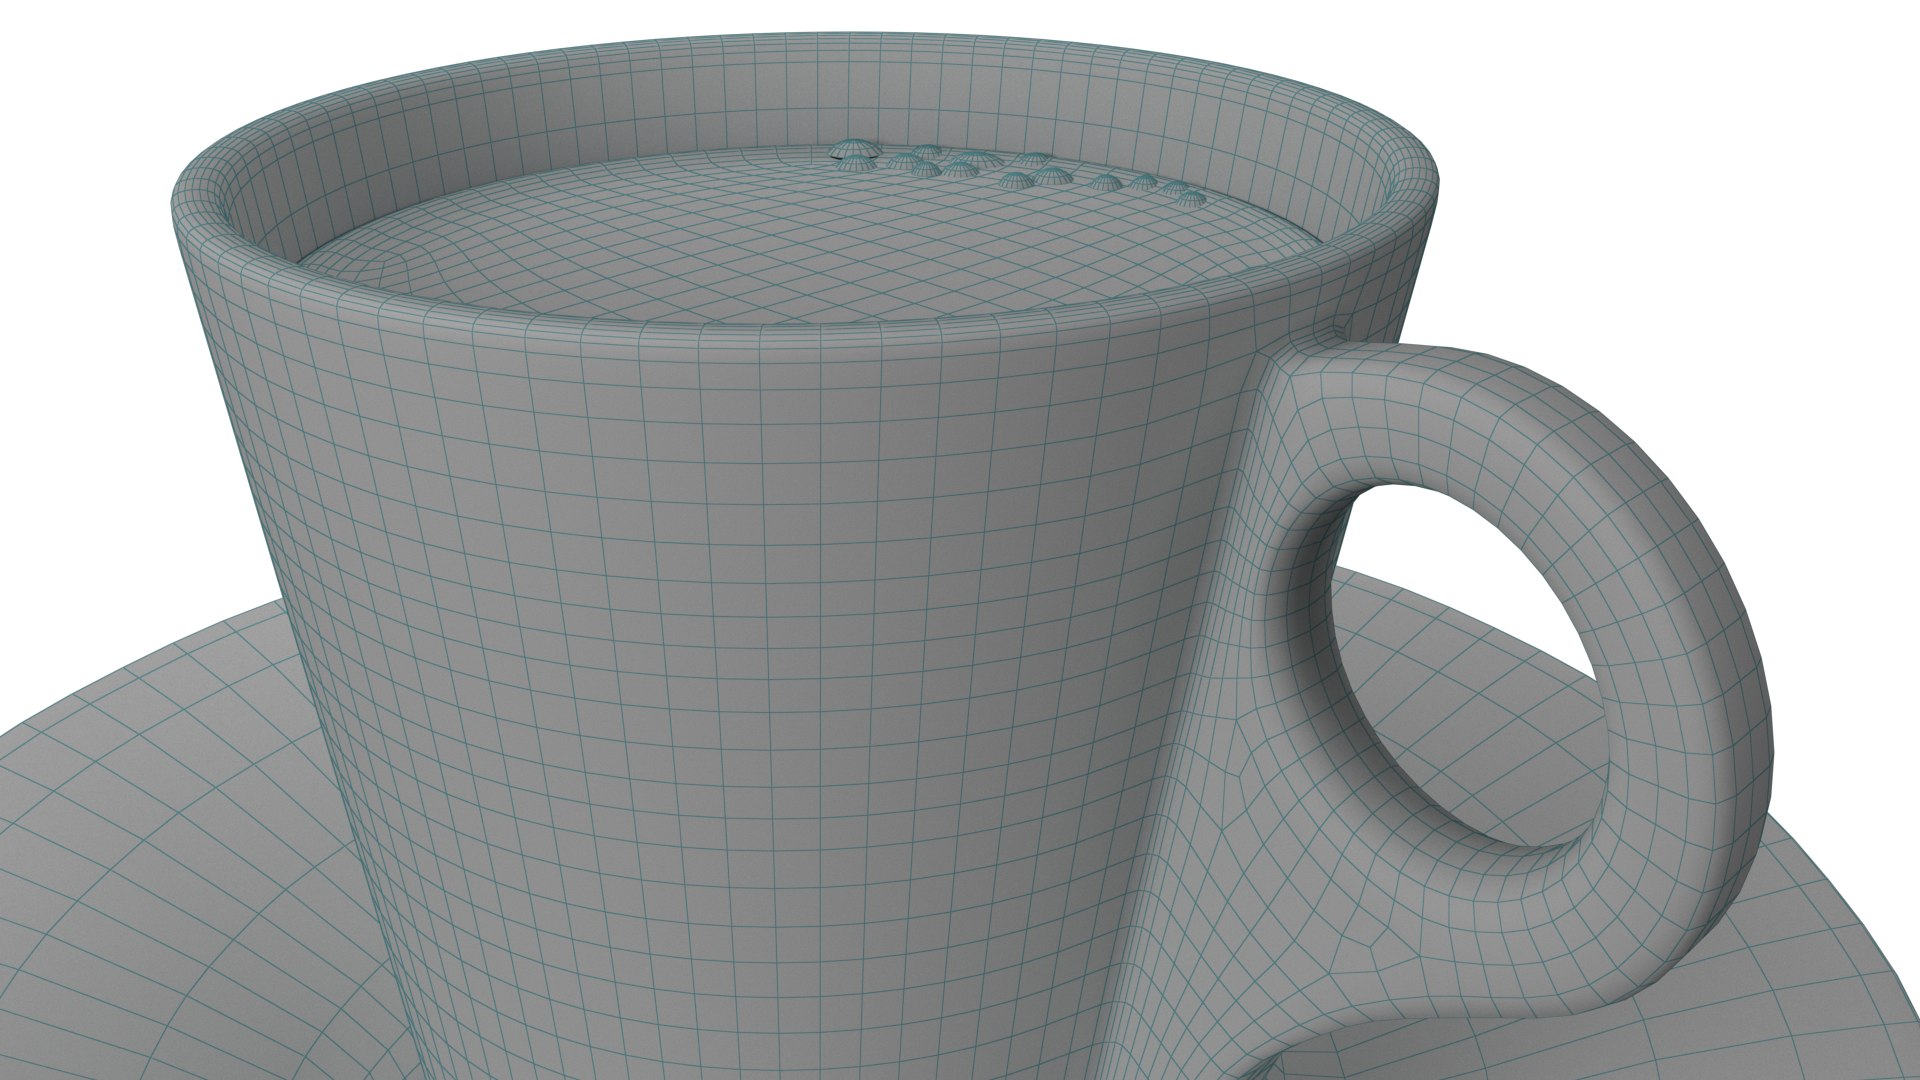 Cup of Lavazza coffee 3D model